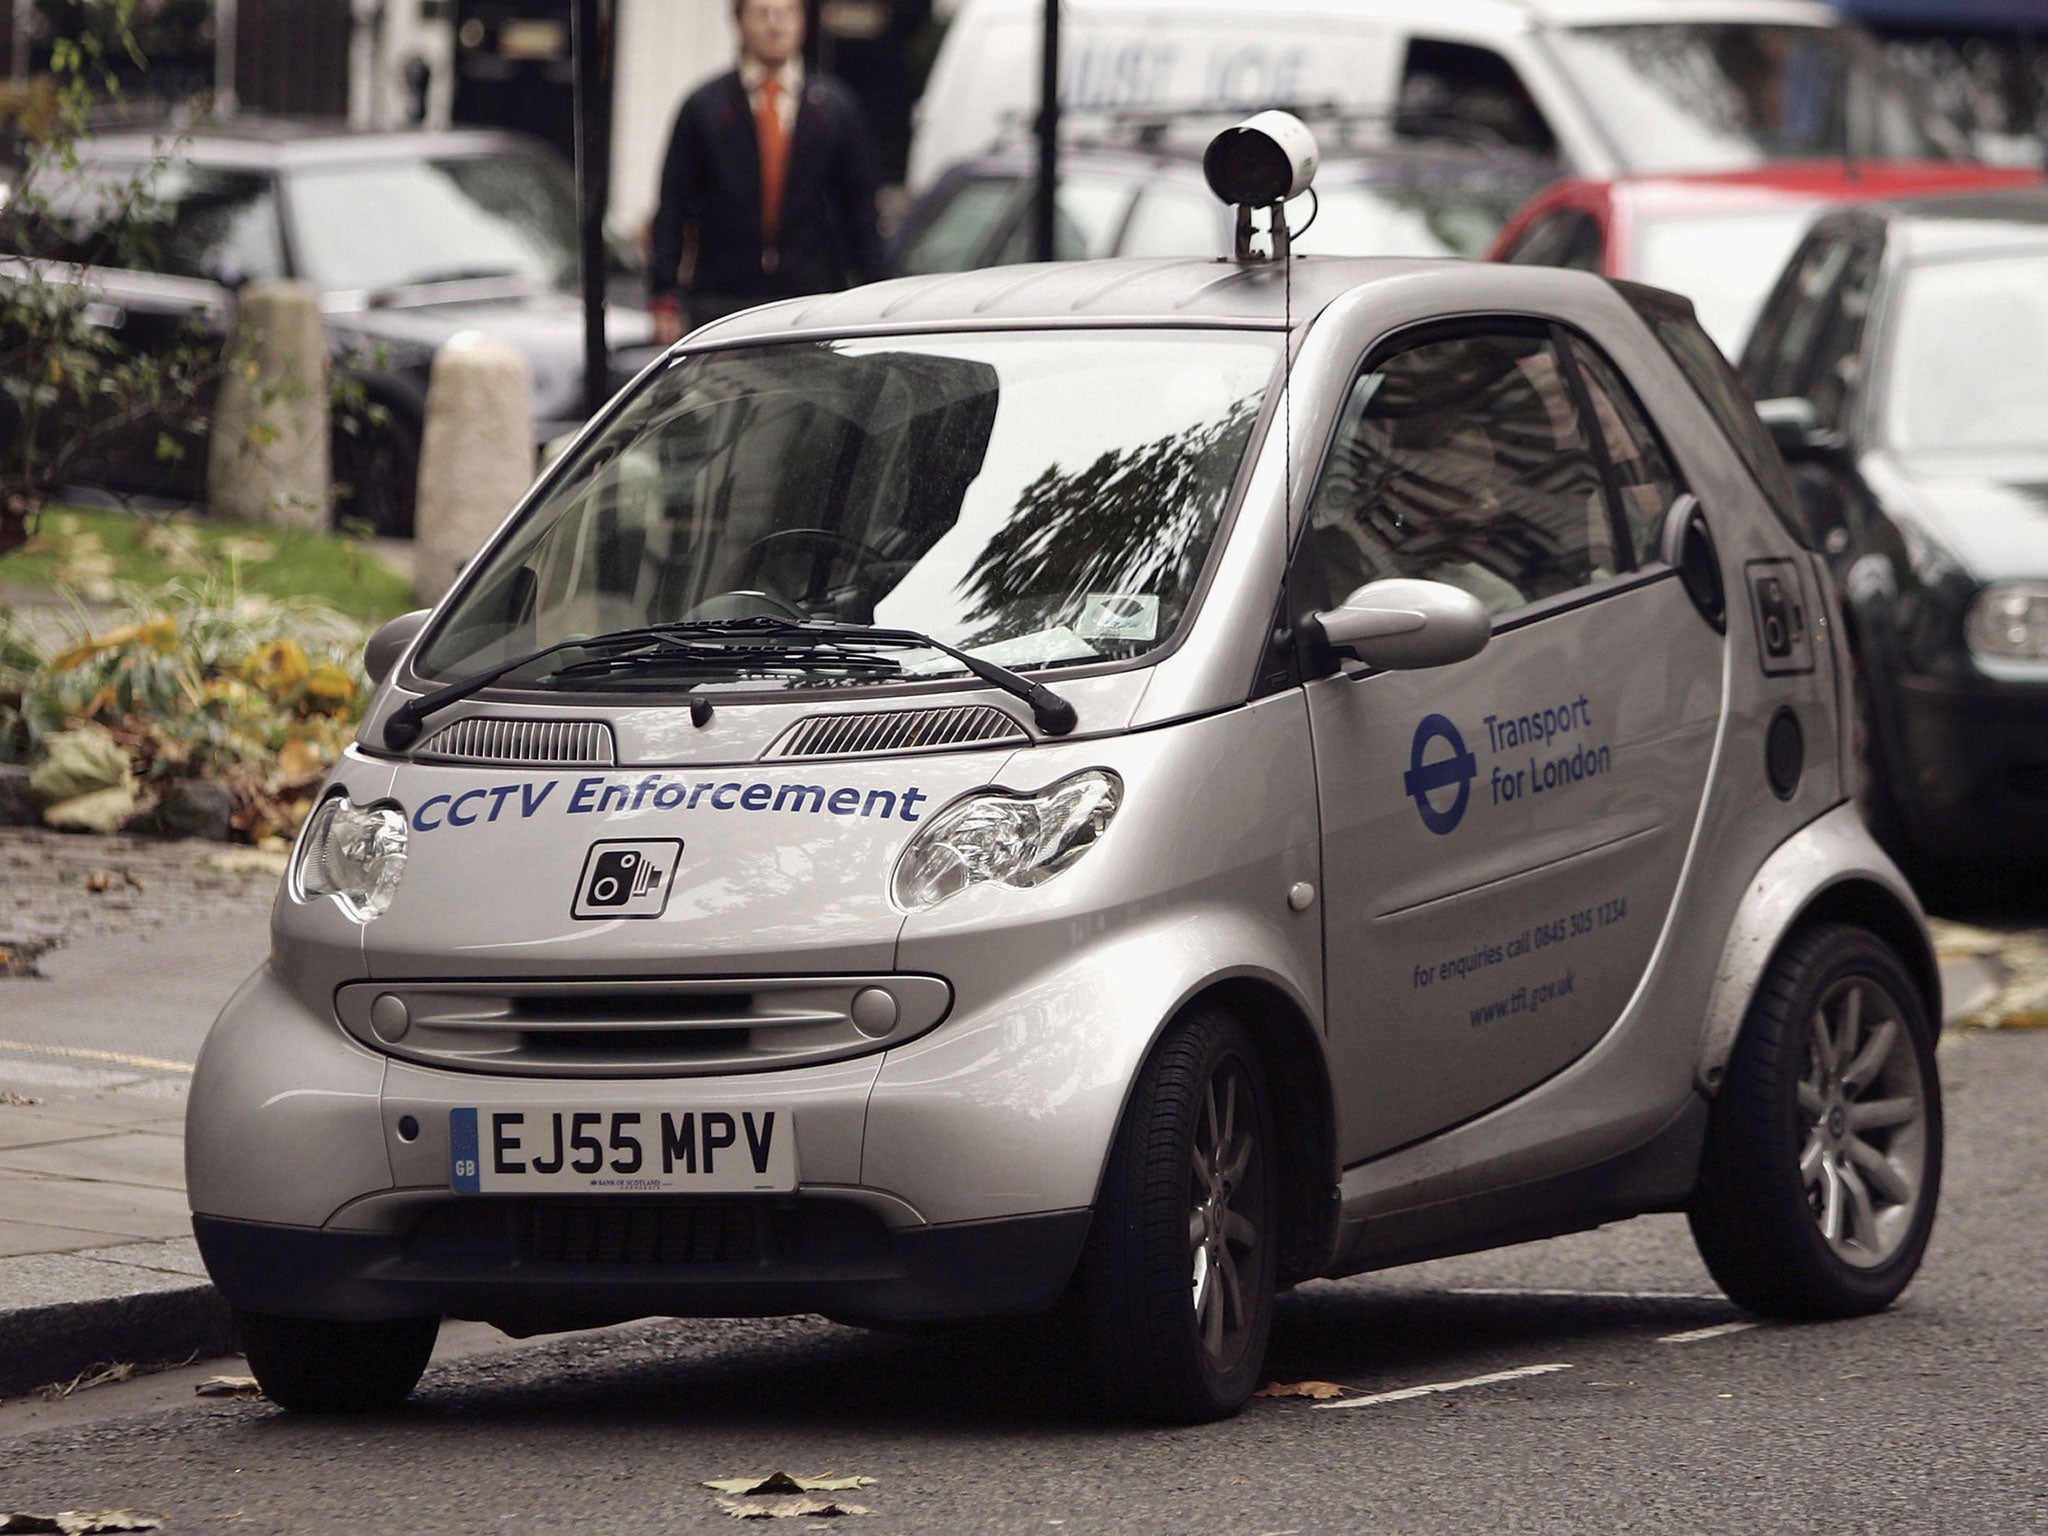 At least 58 local authorities are using CCTV camera cars – an 87 percent increase since 2009